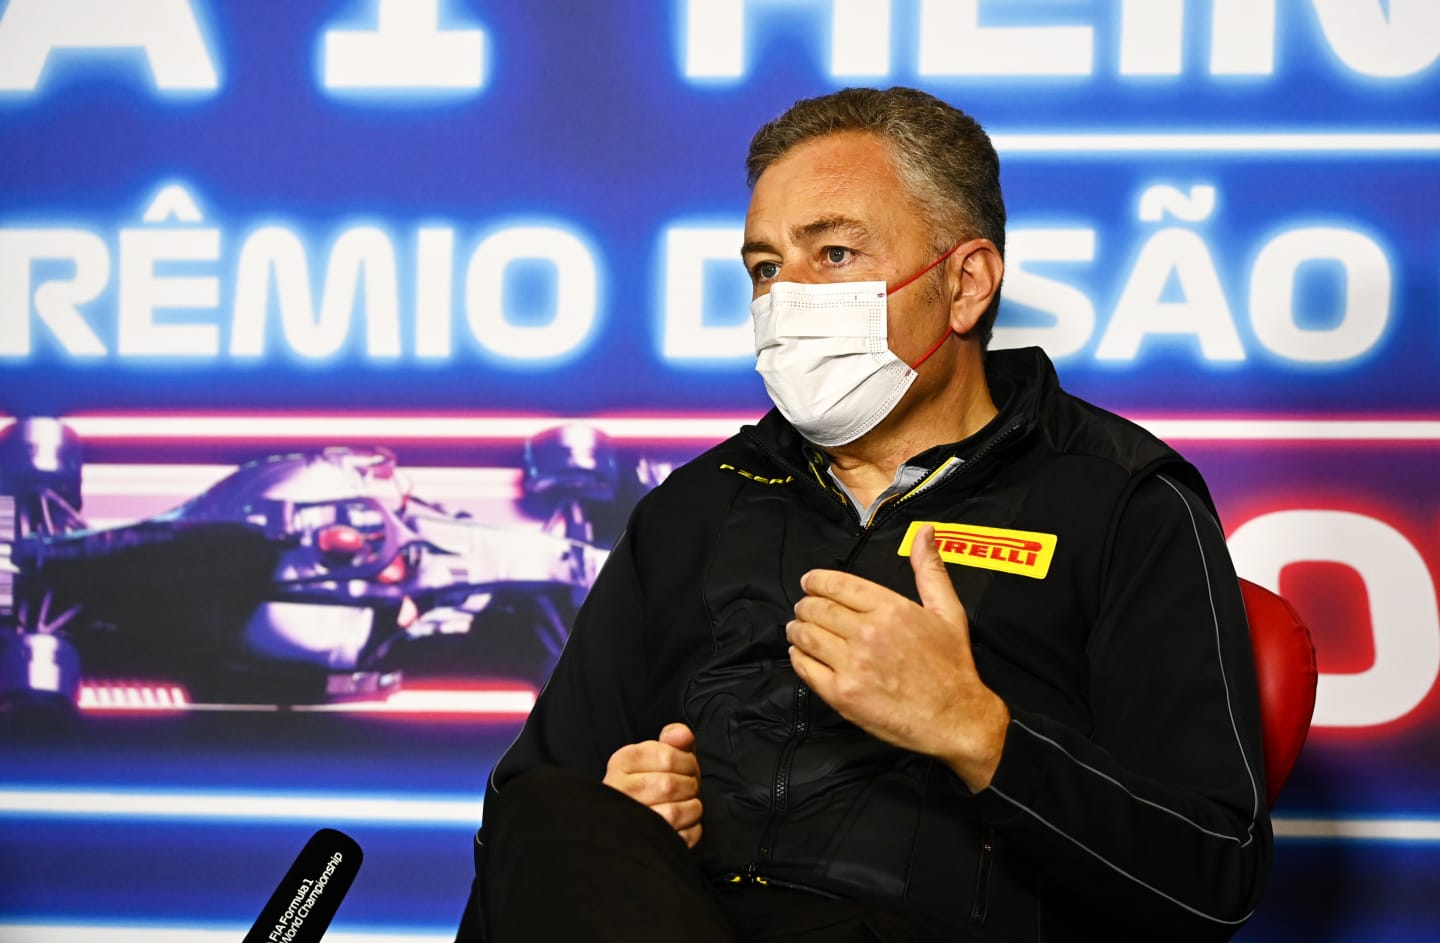 SAO PAULO, BRAZIL - NOVEMBER 12: Director of Pirelli F1 Mario Isola talks in the Team Principals Press Conference after practice ahead of the F1 Grand Prix of Brazil at Autodromo Jose Carlos Pace on November 12, 2021 in Sao Paulo, Brazil. (Photo by Clive Mason/Getty Images)